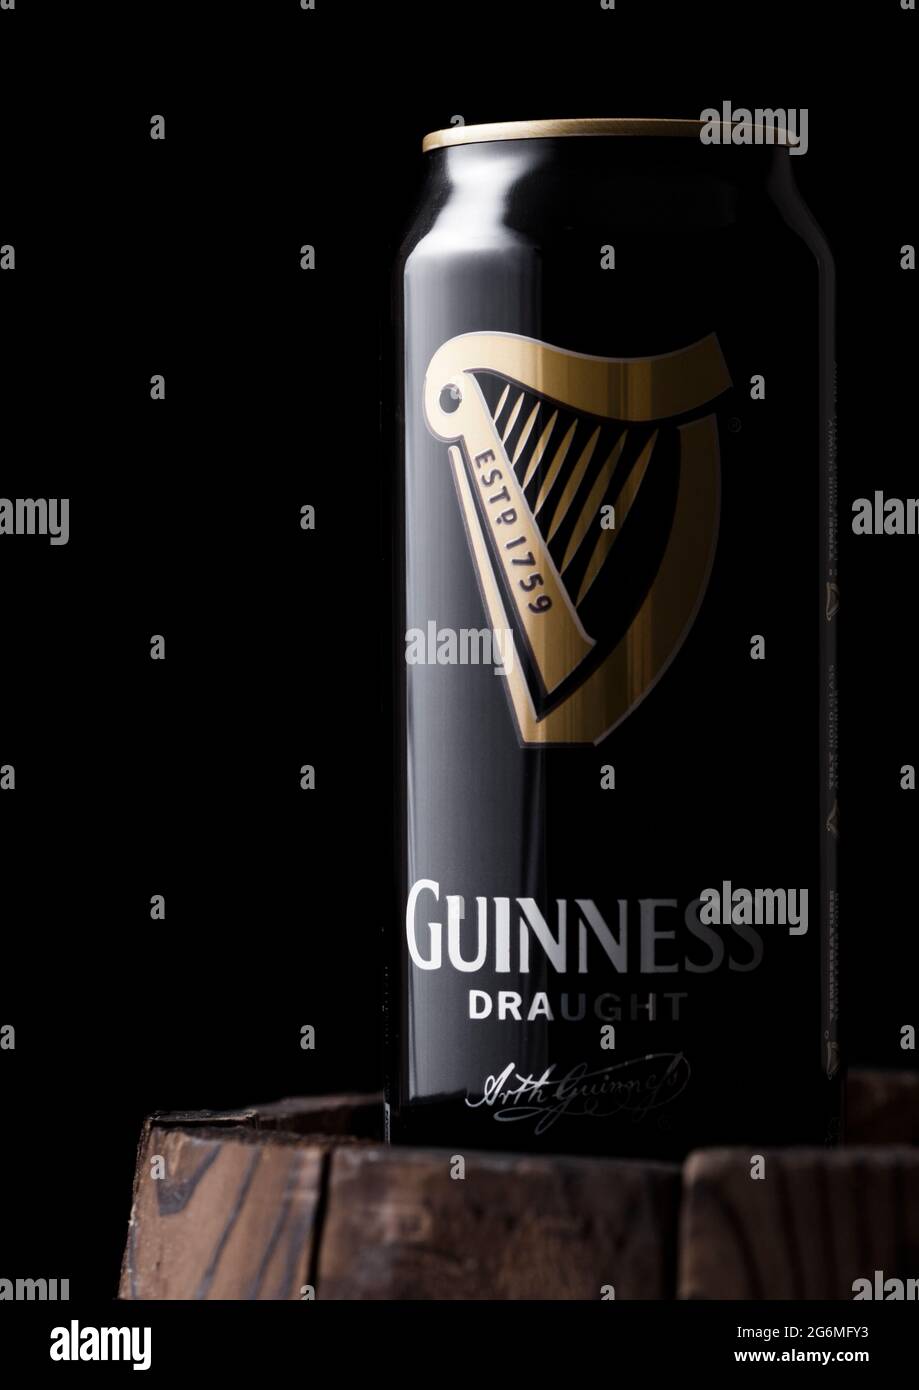 LONDON, UK - APRIL 27, 2018: Aluminium can of Guinness draught stout beer on top of old wooden barrel. Guinness beer has been produced since 1759 in D Stock Photo